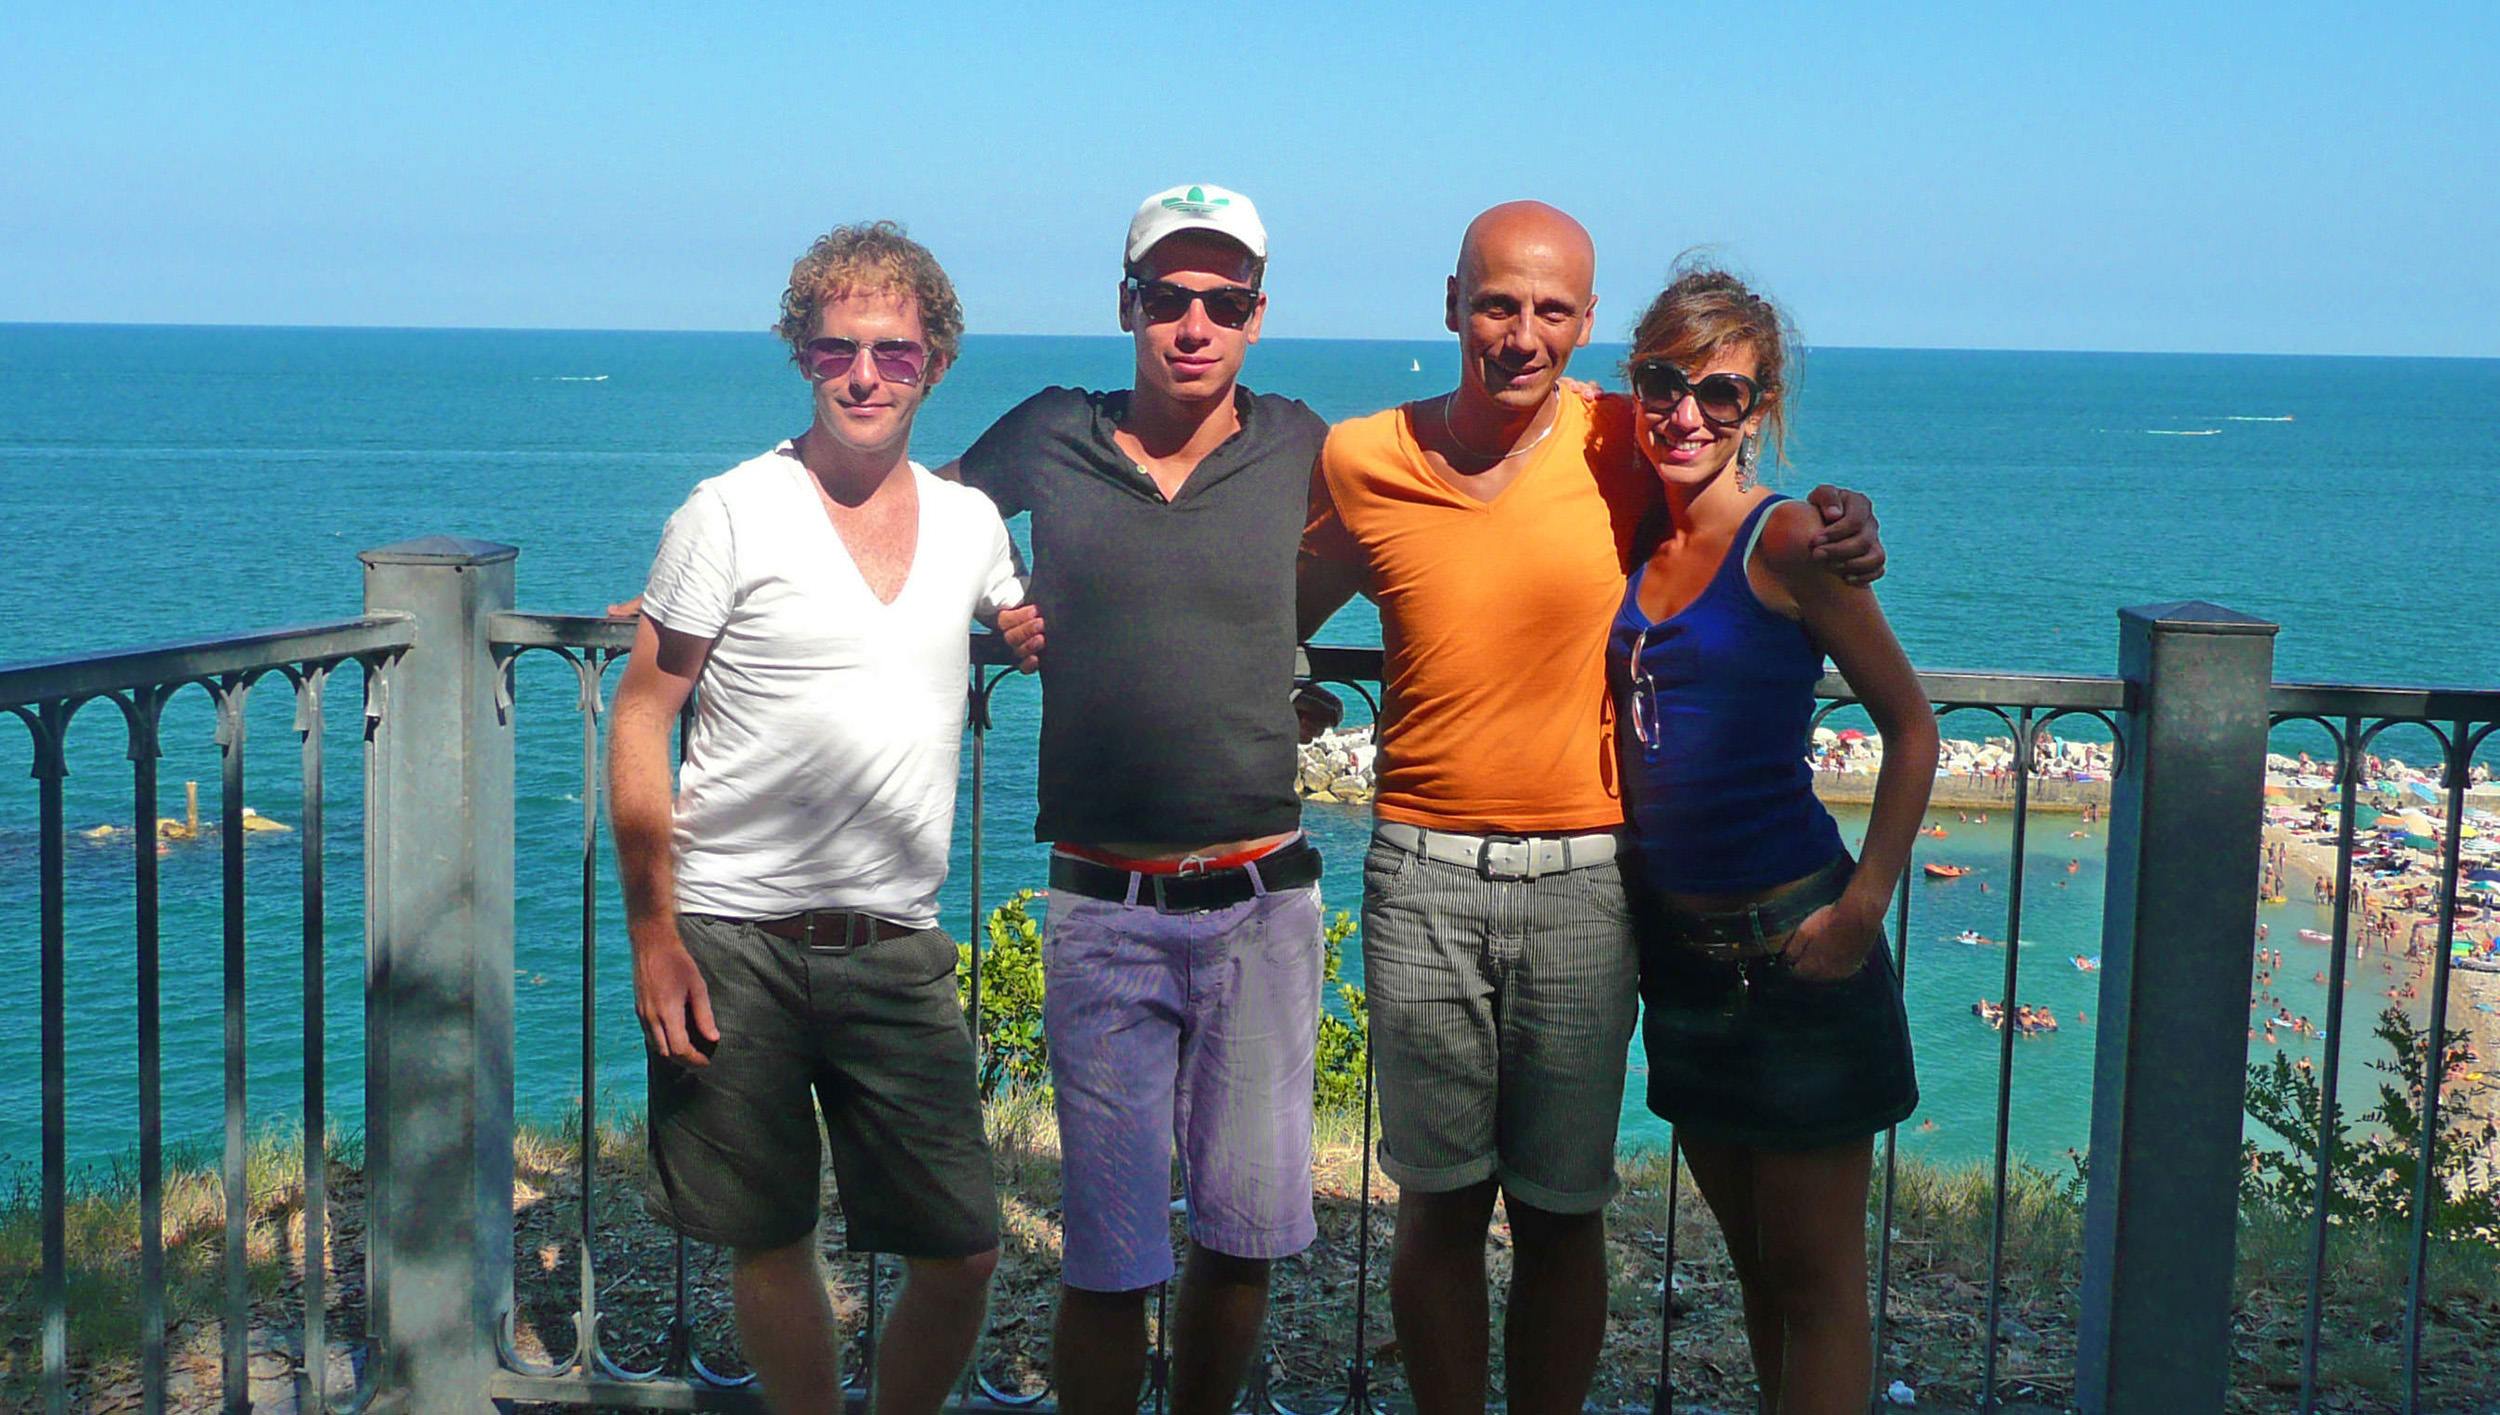 Ben with Roberto and friends near San Benedetto in Italy